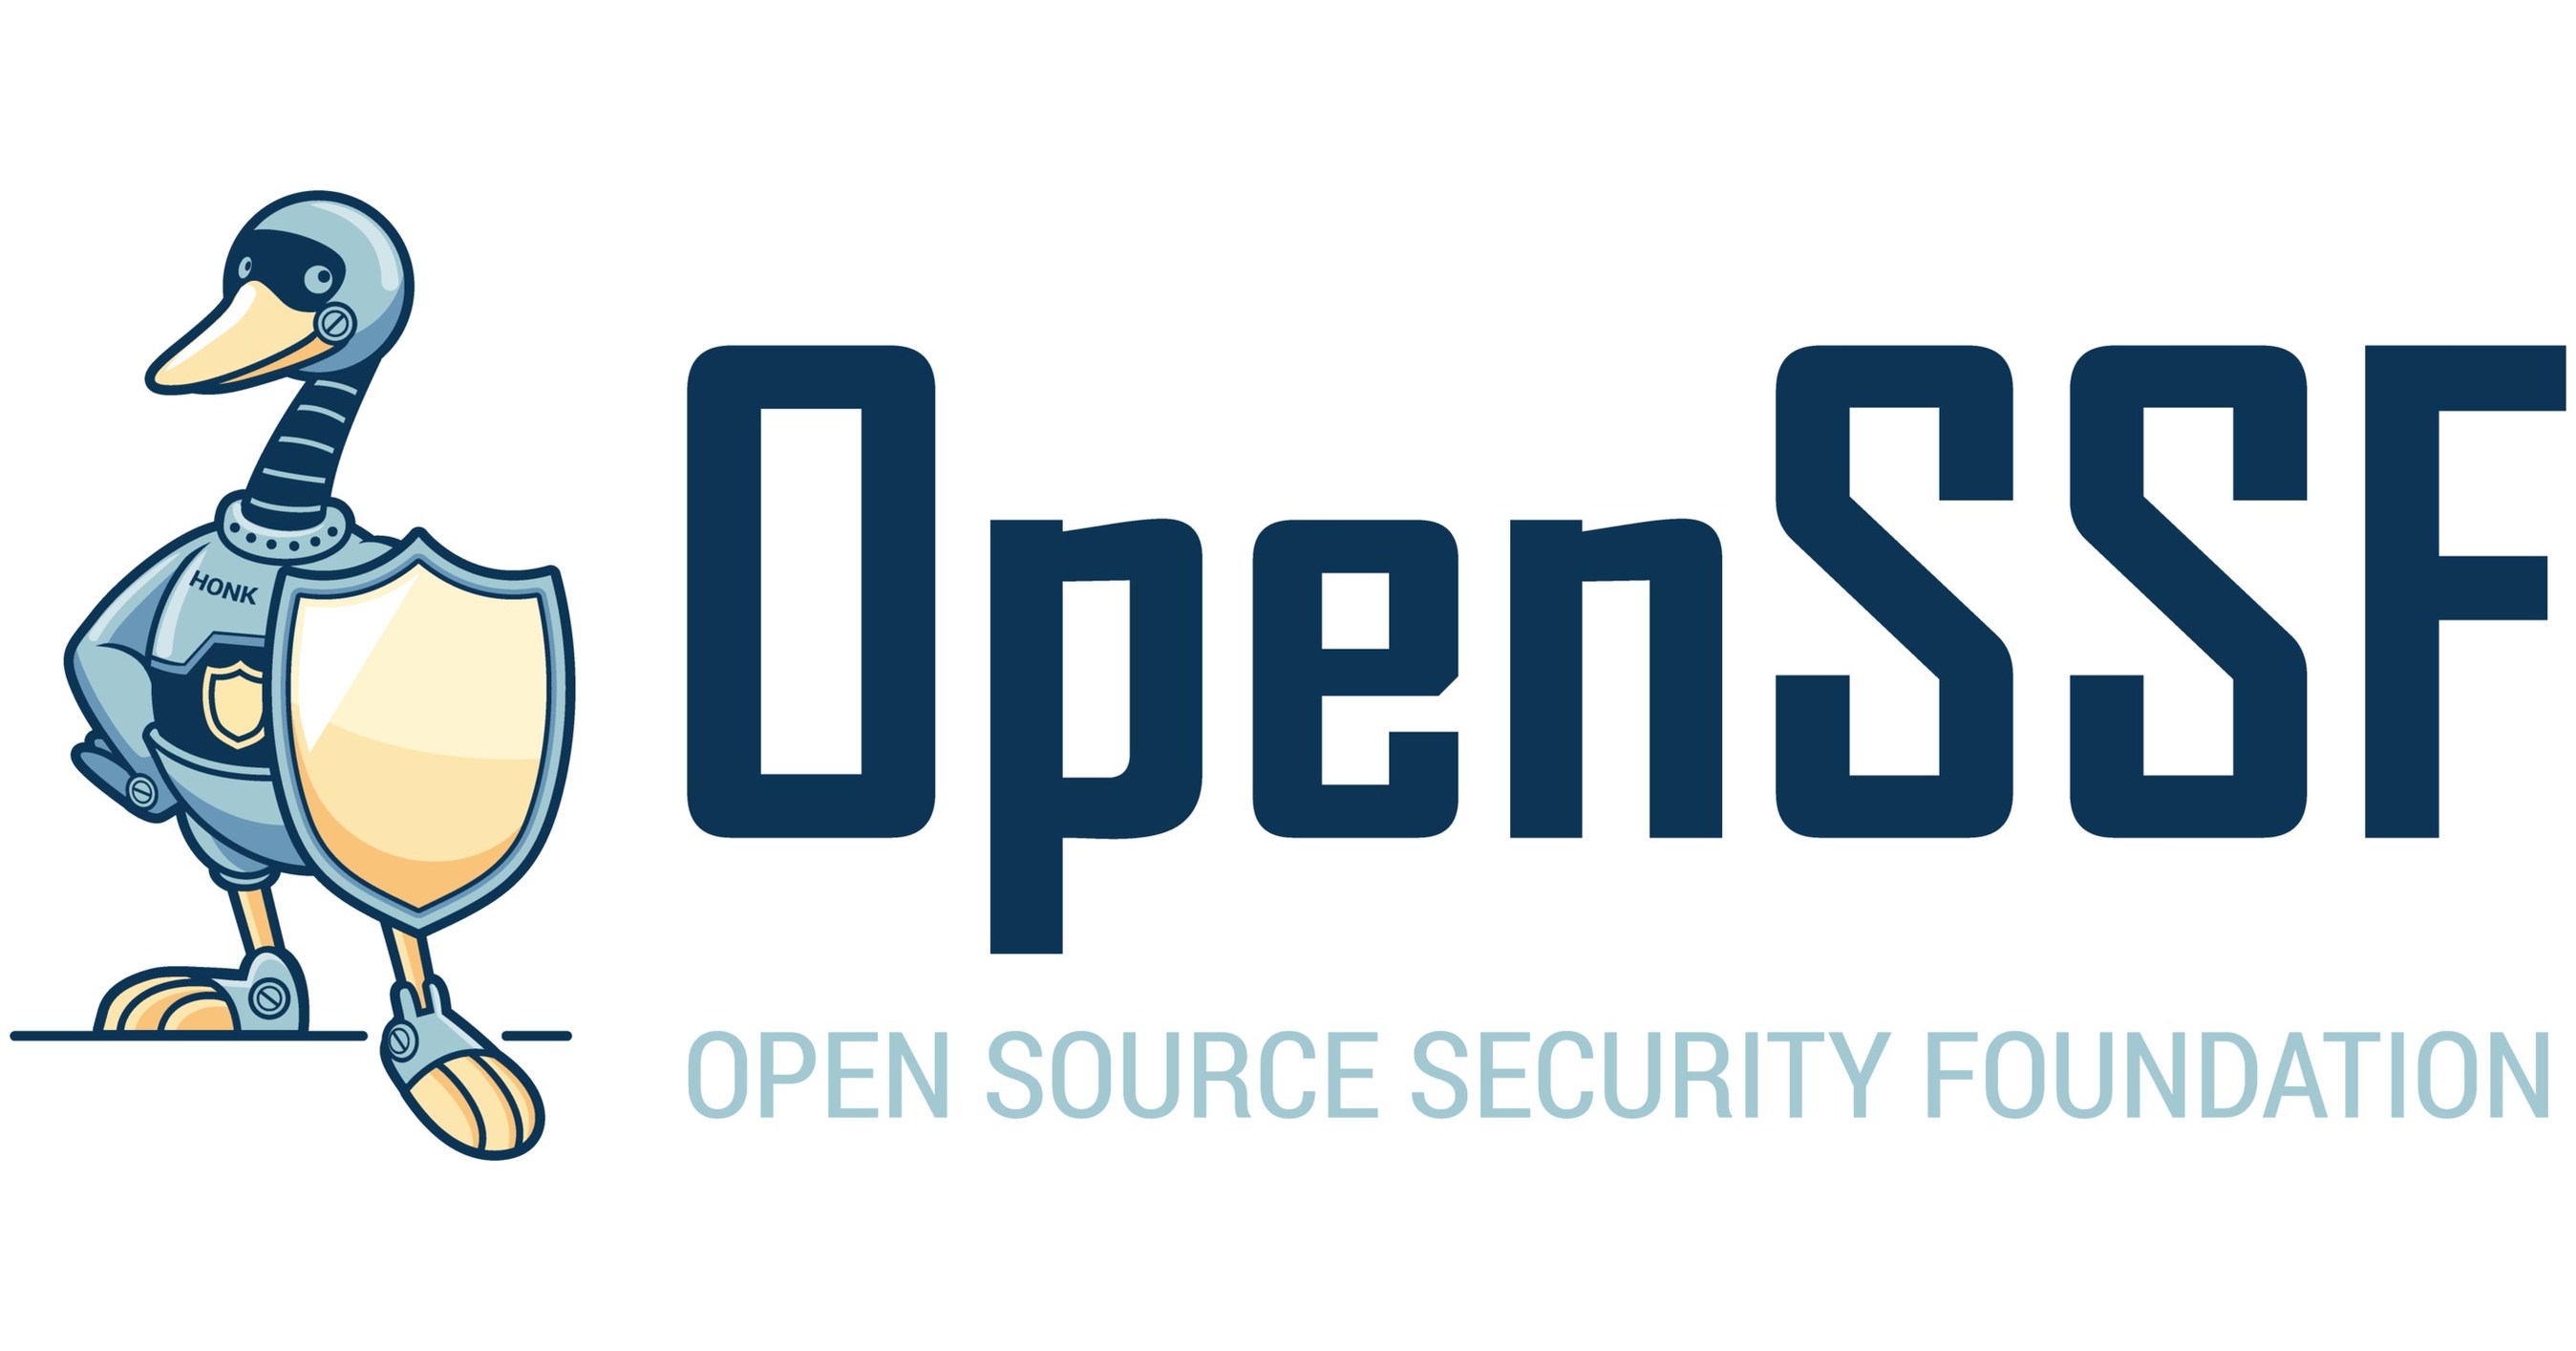 OpenSSF Membership Exceeds 100 with Many New Members Dedicated to Securing Open Source Software